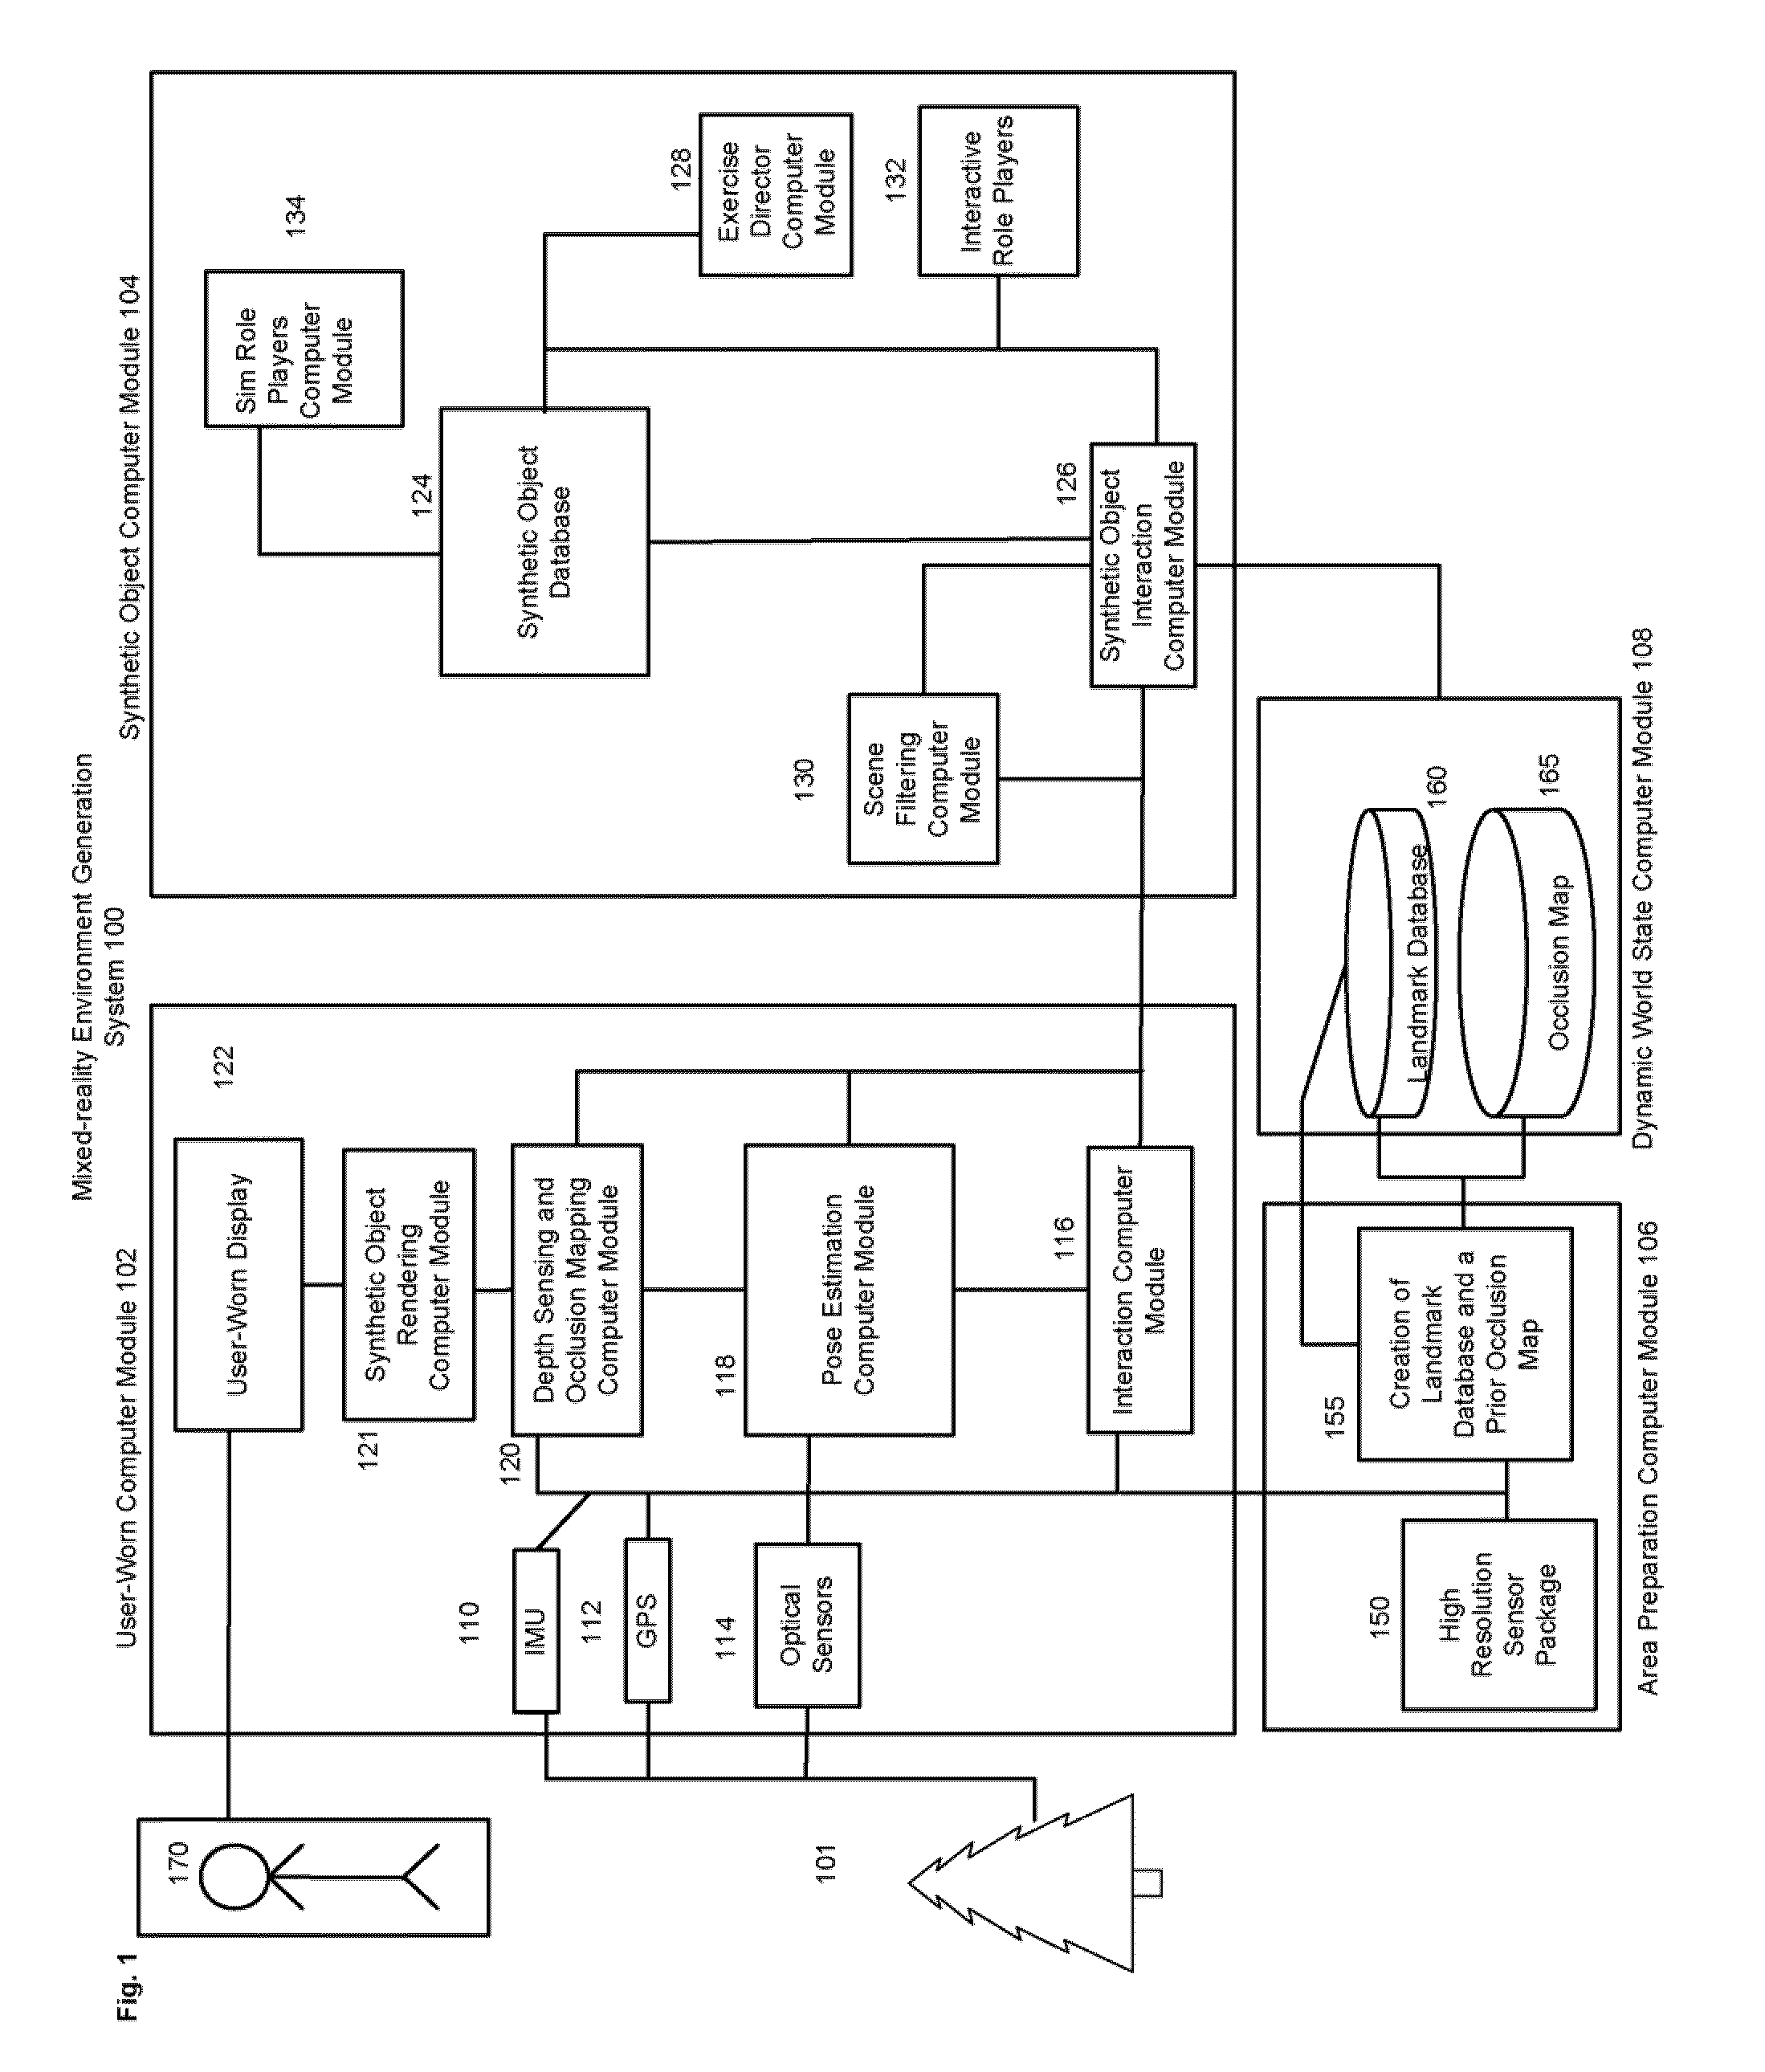 System and method for generating a mixed reality environment